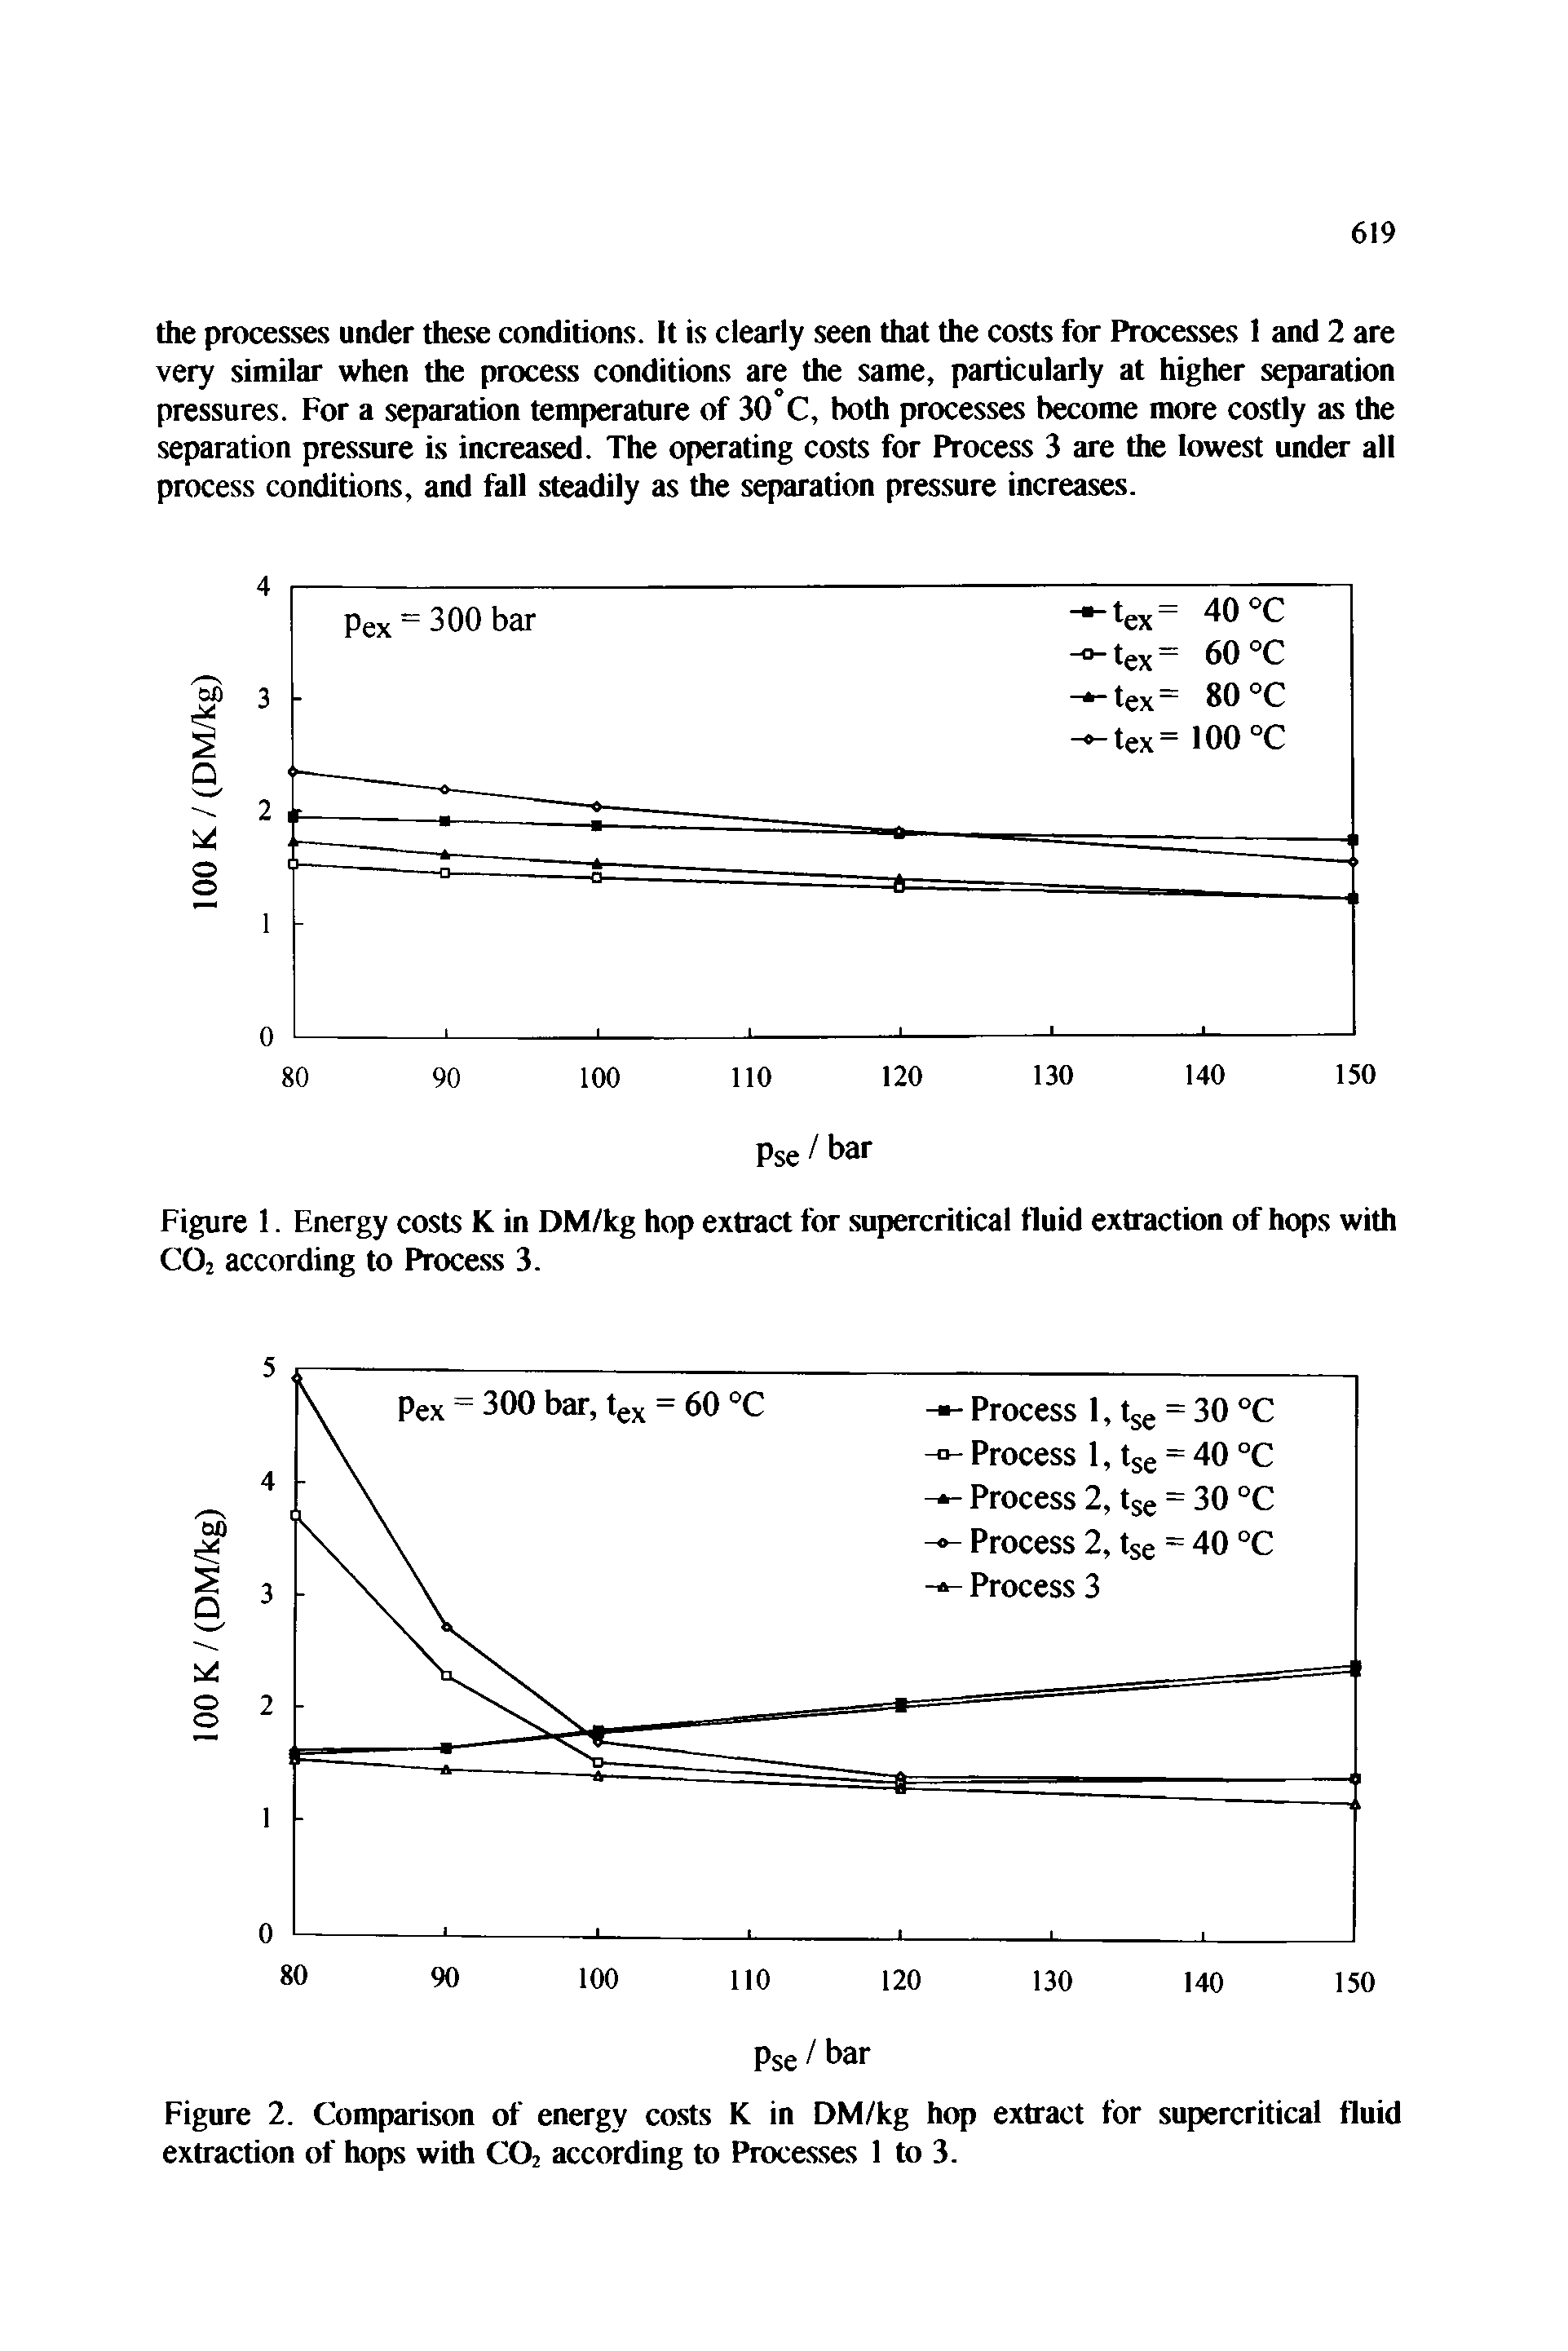 Figure 2. Comparison of energy costs K in DM/kg hop extract for supercritical fluid extraction of hops with C02 according to Processes 1 to 3.